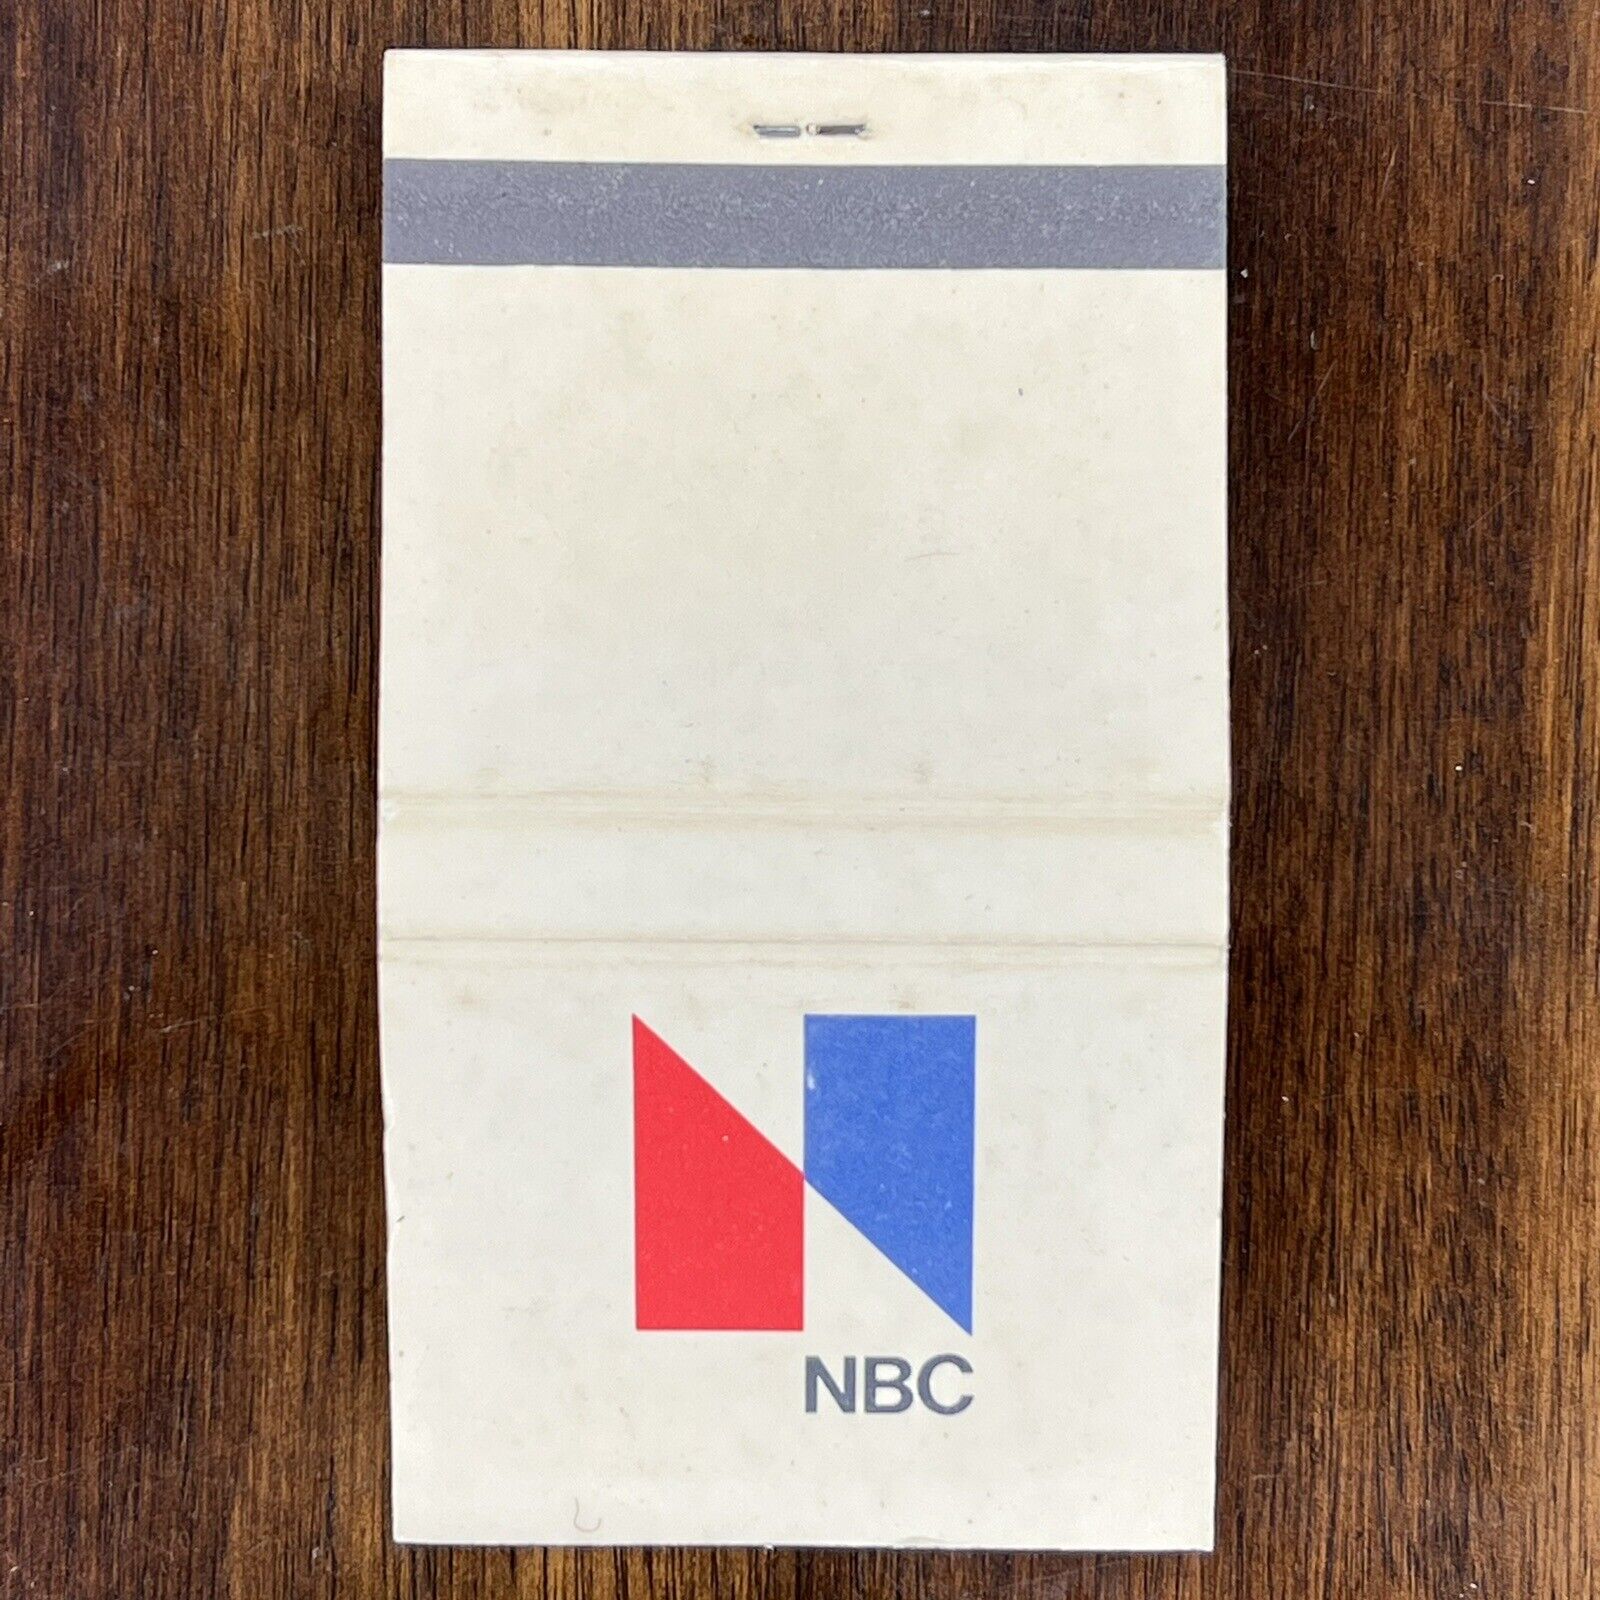 Rare Vintage Matchbook NBC National Broadcasting Company Matches Unstruck